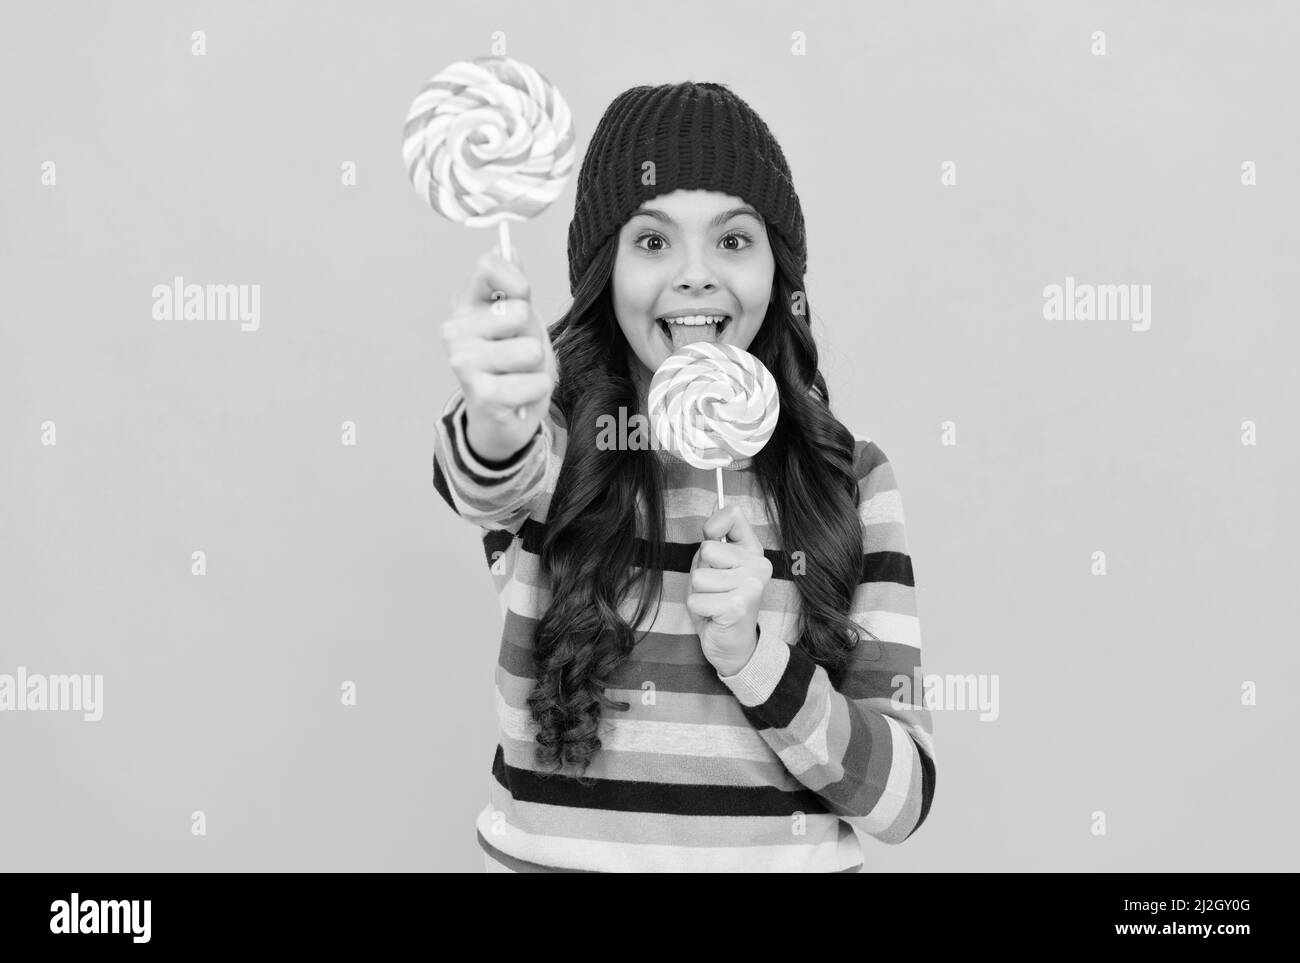 yummy. selective focus. happy teen girl licking lollipop. lollipop lady. kid with colorful lollypop Stock Photo